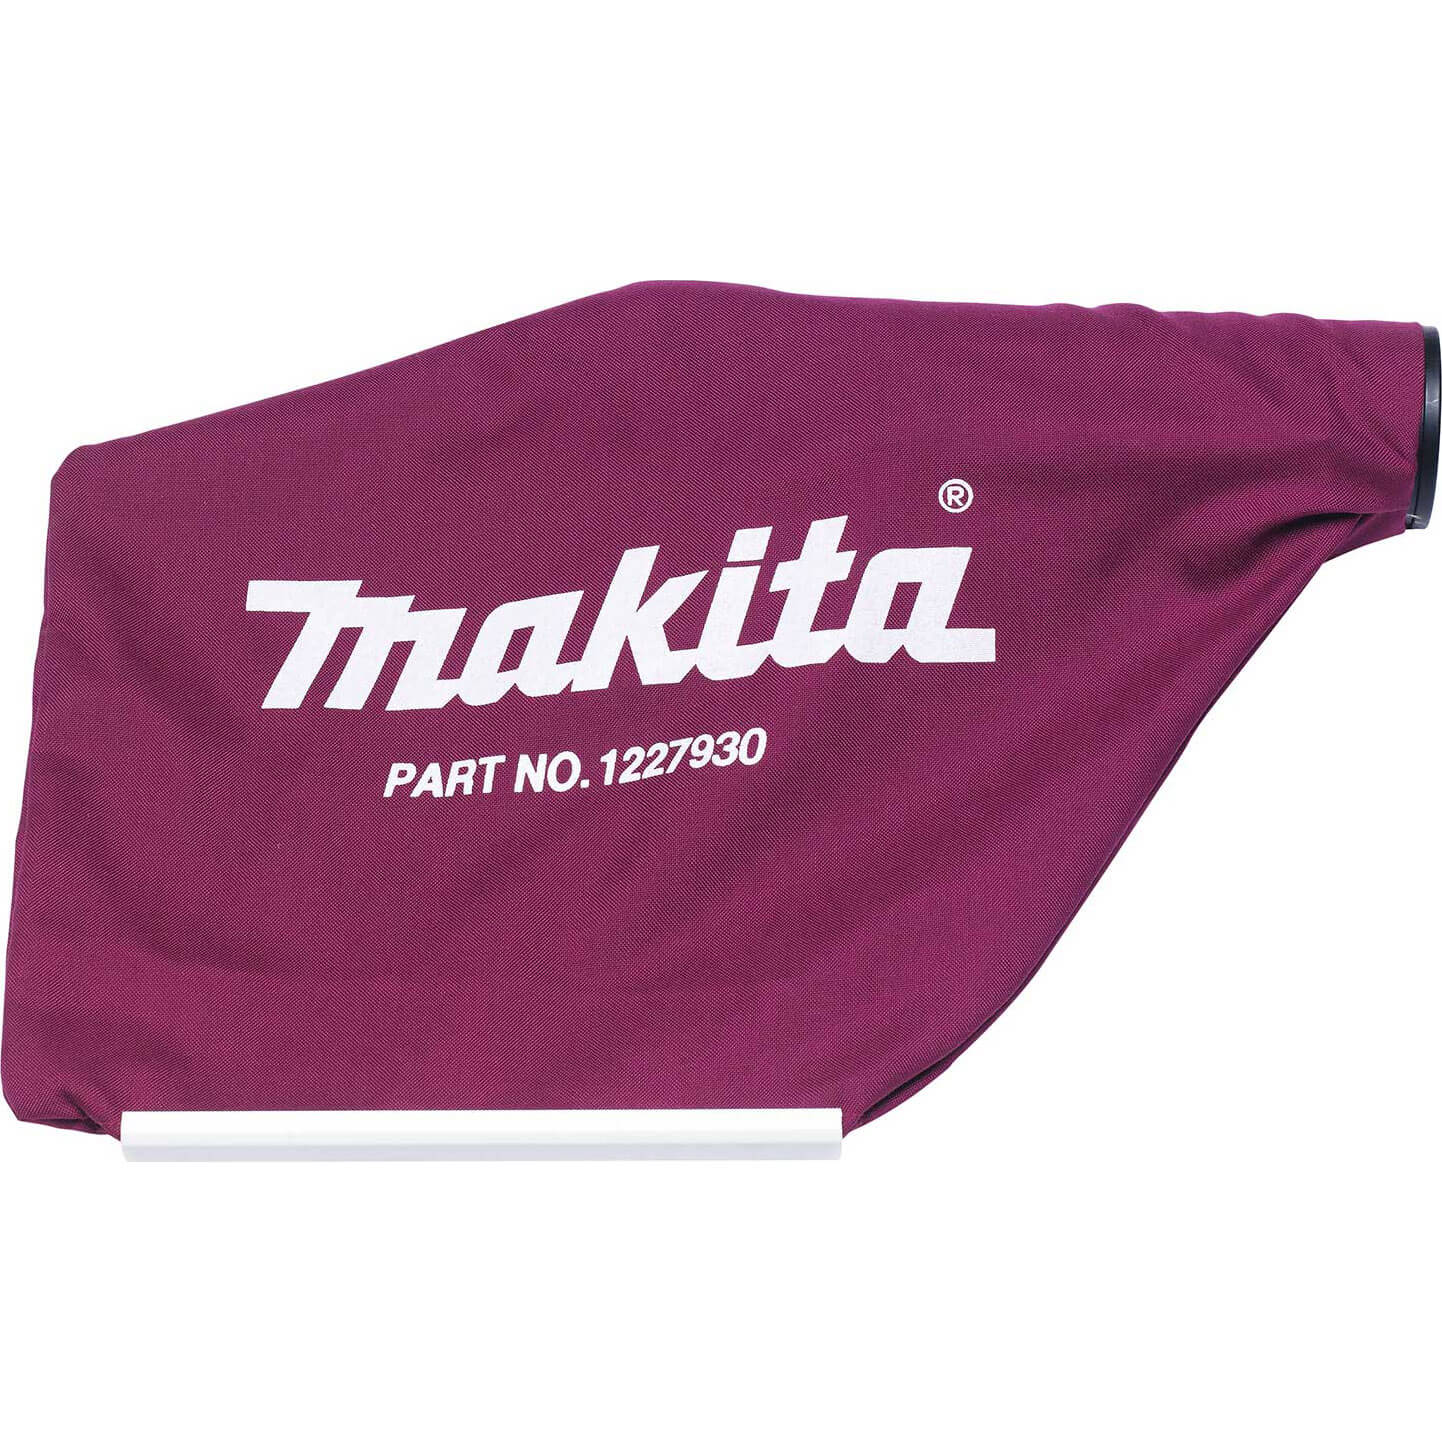 Photos - Power Tool Accessory Makita Dust Bag for DKP180 Cordless Planer 122793-0 